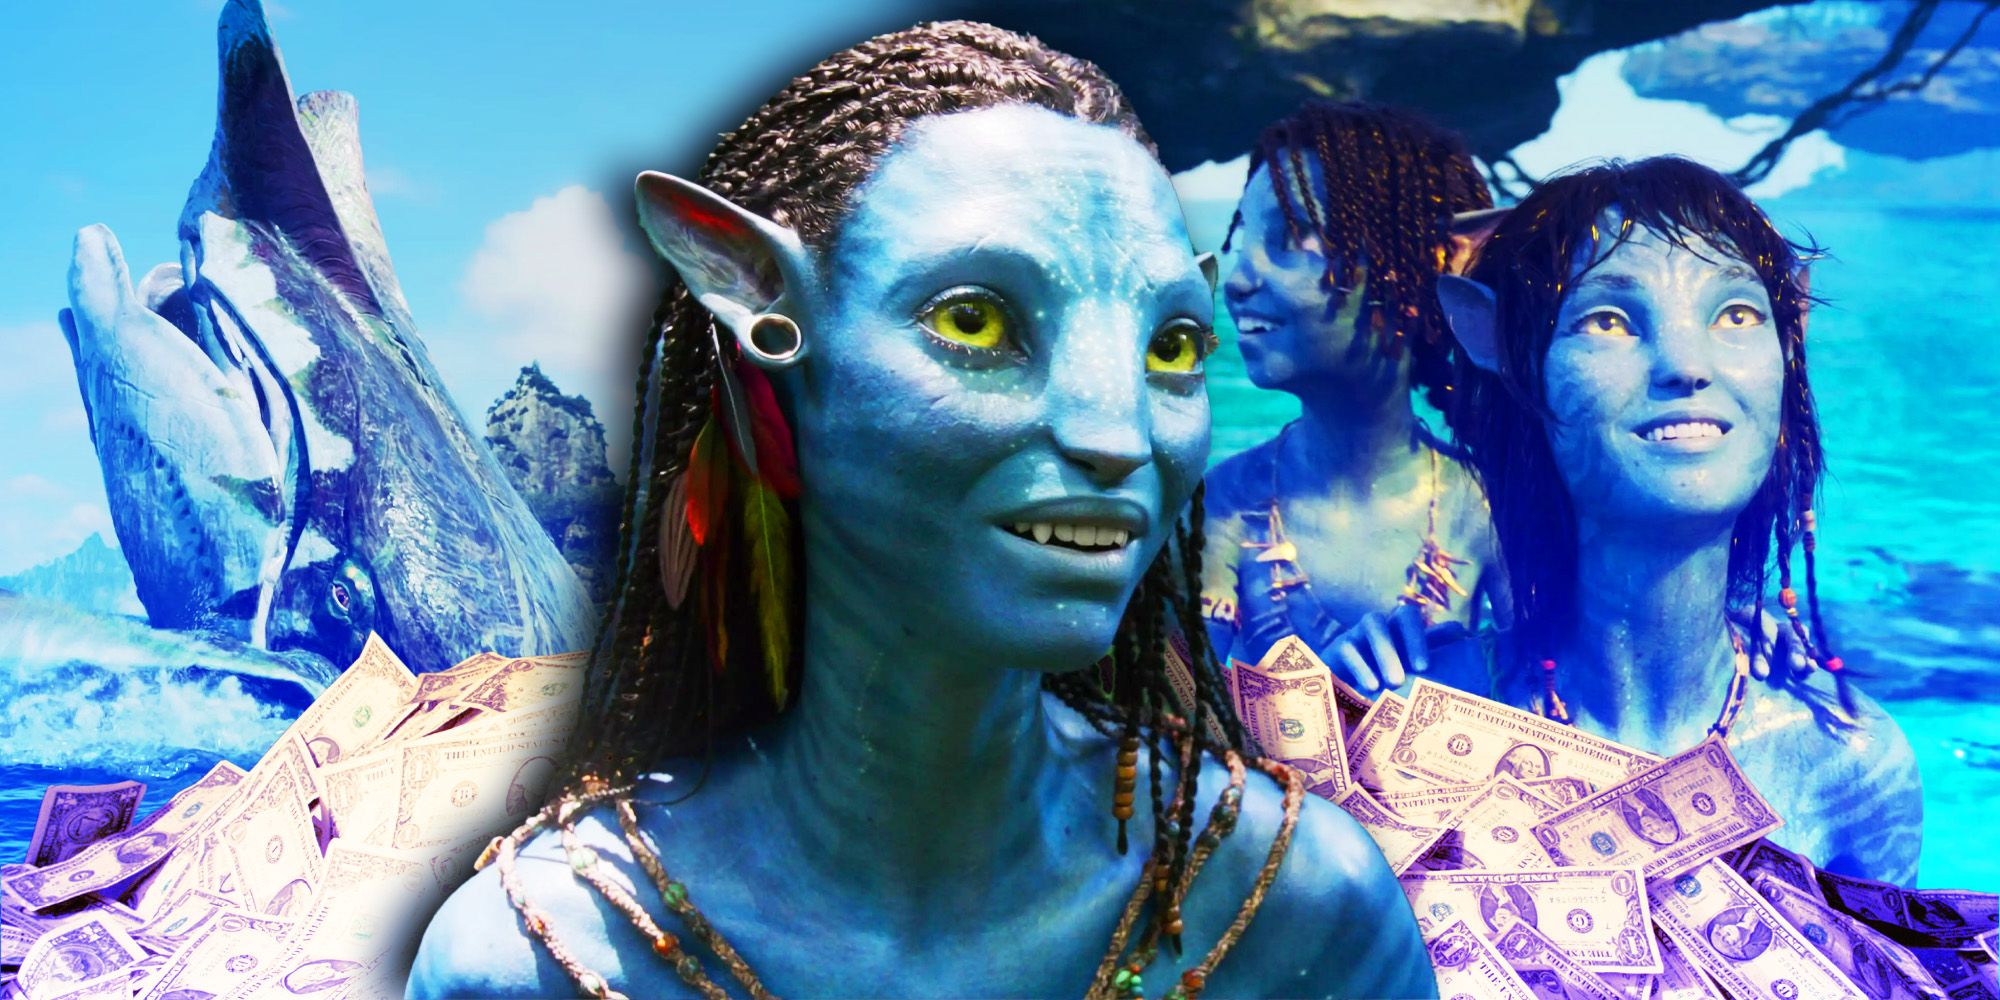 Characters from the Avatar series